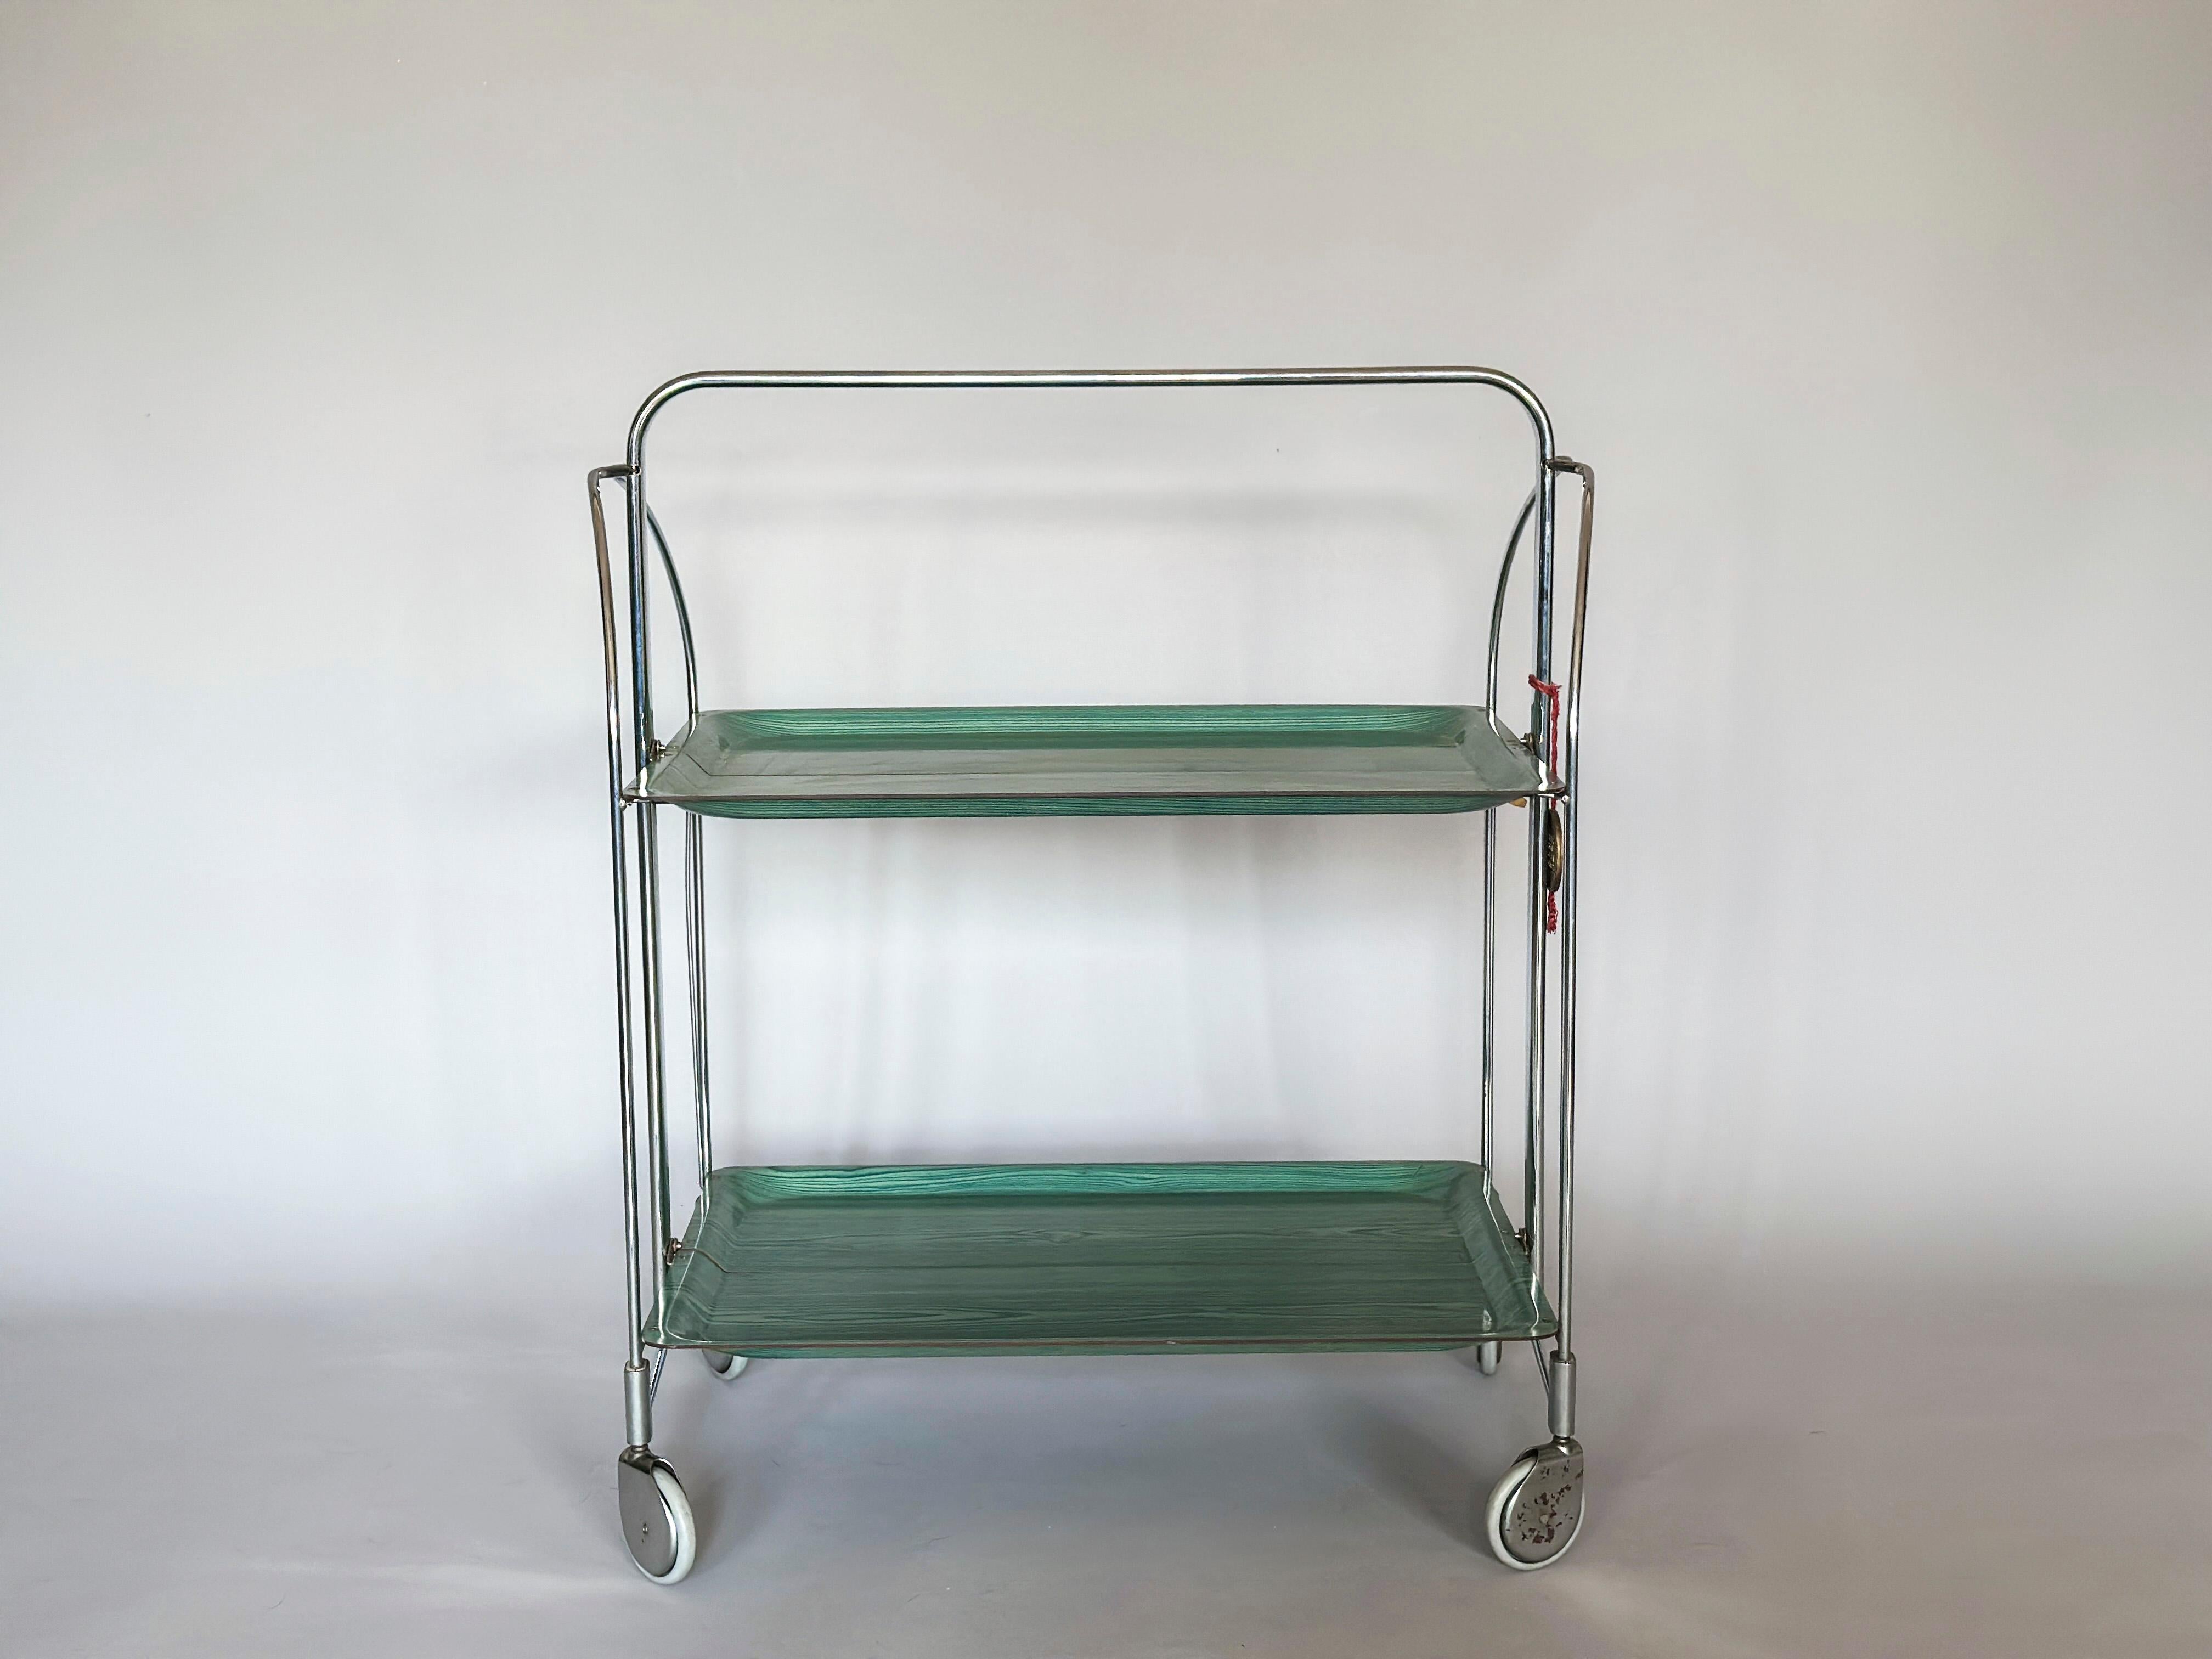 Mid-Century Modern folding bar cart on wheels from Gerlinol from circa 1960. 

The trolley folds out on one side.